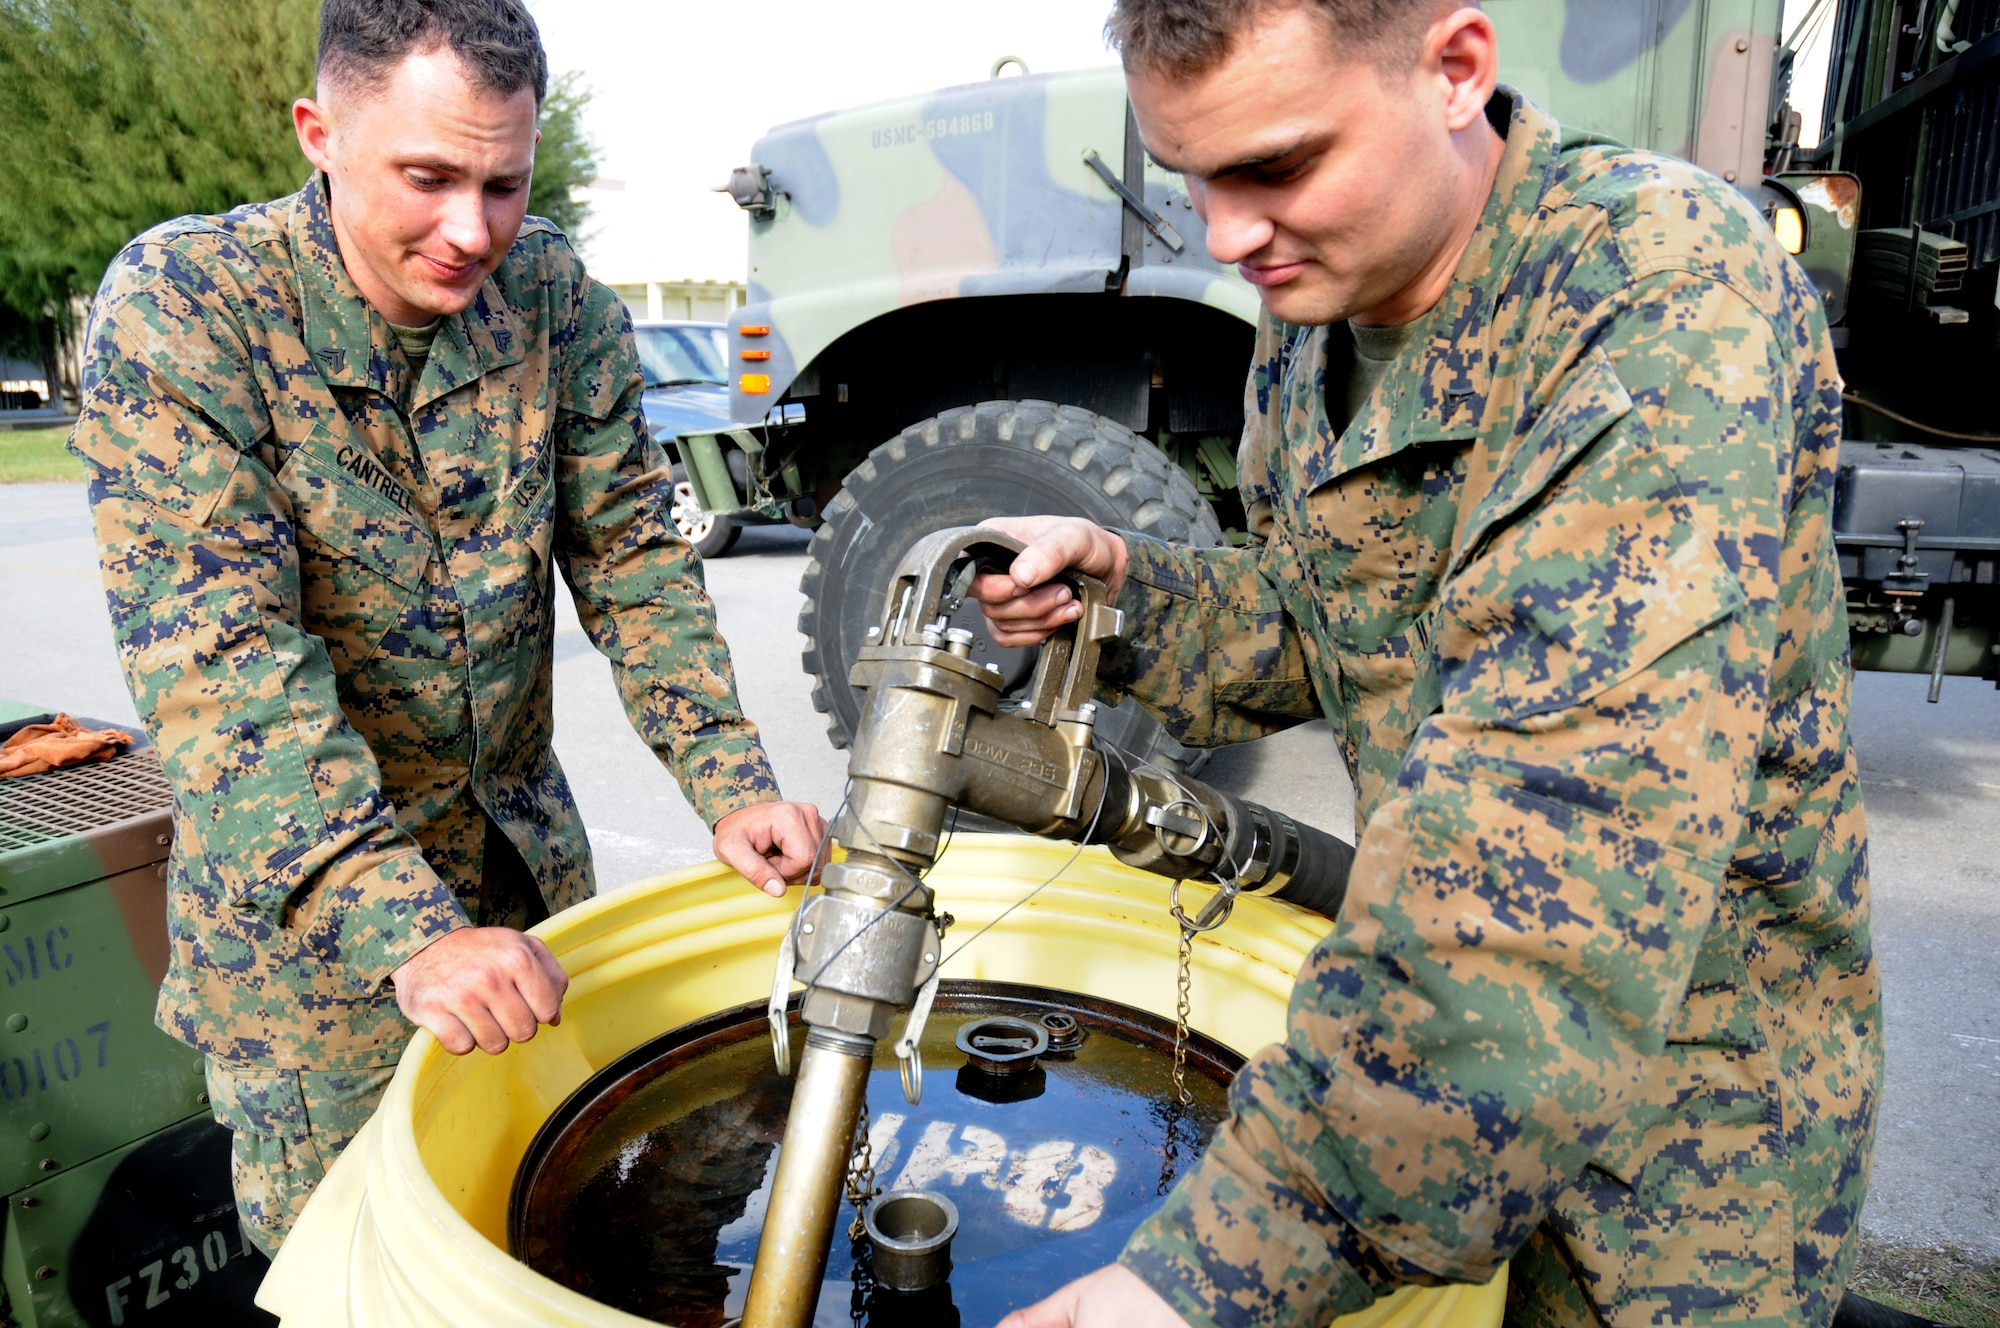 Cpl. Matthew Cantrell (left)  and Lance Cpl. Ryan Zimmerman, both from the Marine Wing Support Squadron-172 transport and fuel the generators during Kadena's Local Operational Readiness Exercise on Dec. 4 at Kadena Air Base. The exercise allows Marines and Airmen to work together in order to ensure joint operations flow smoothly when they get downrange.   (U.S. Air Force photo/Airman 1st Class Amanda Grabiec)